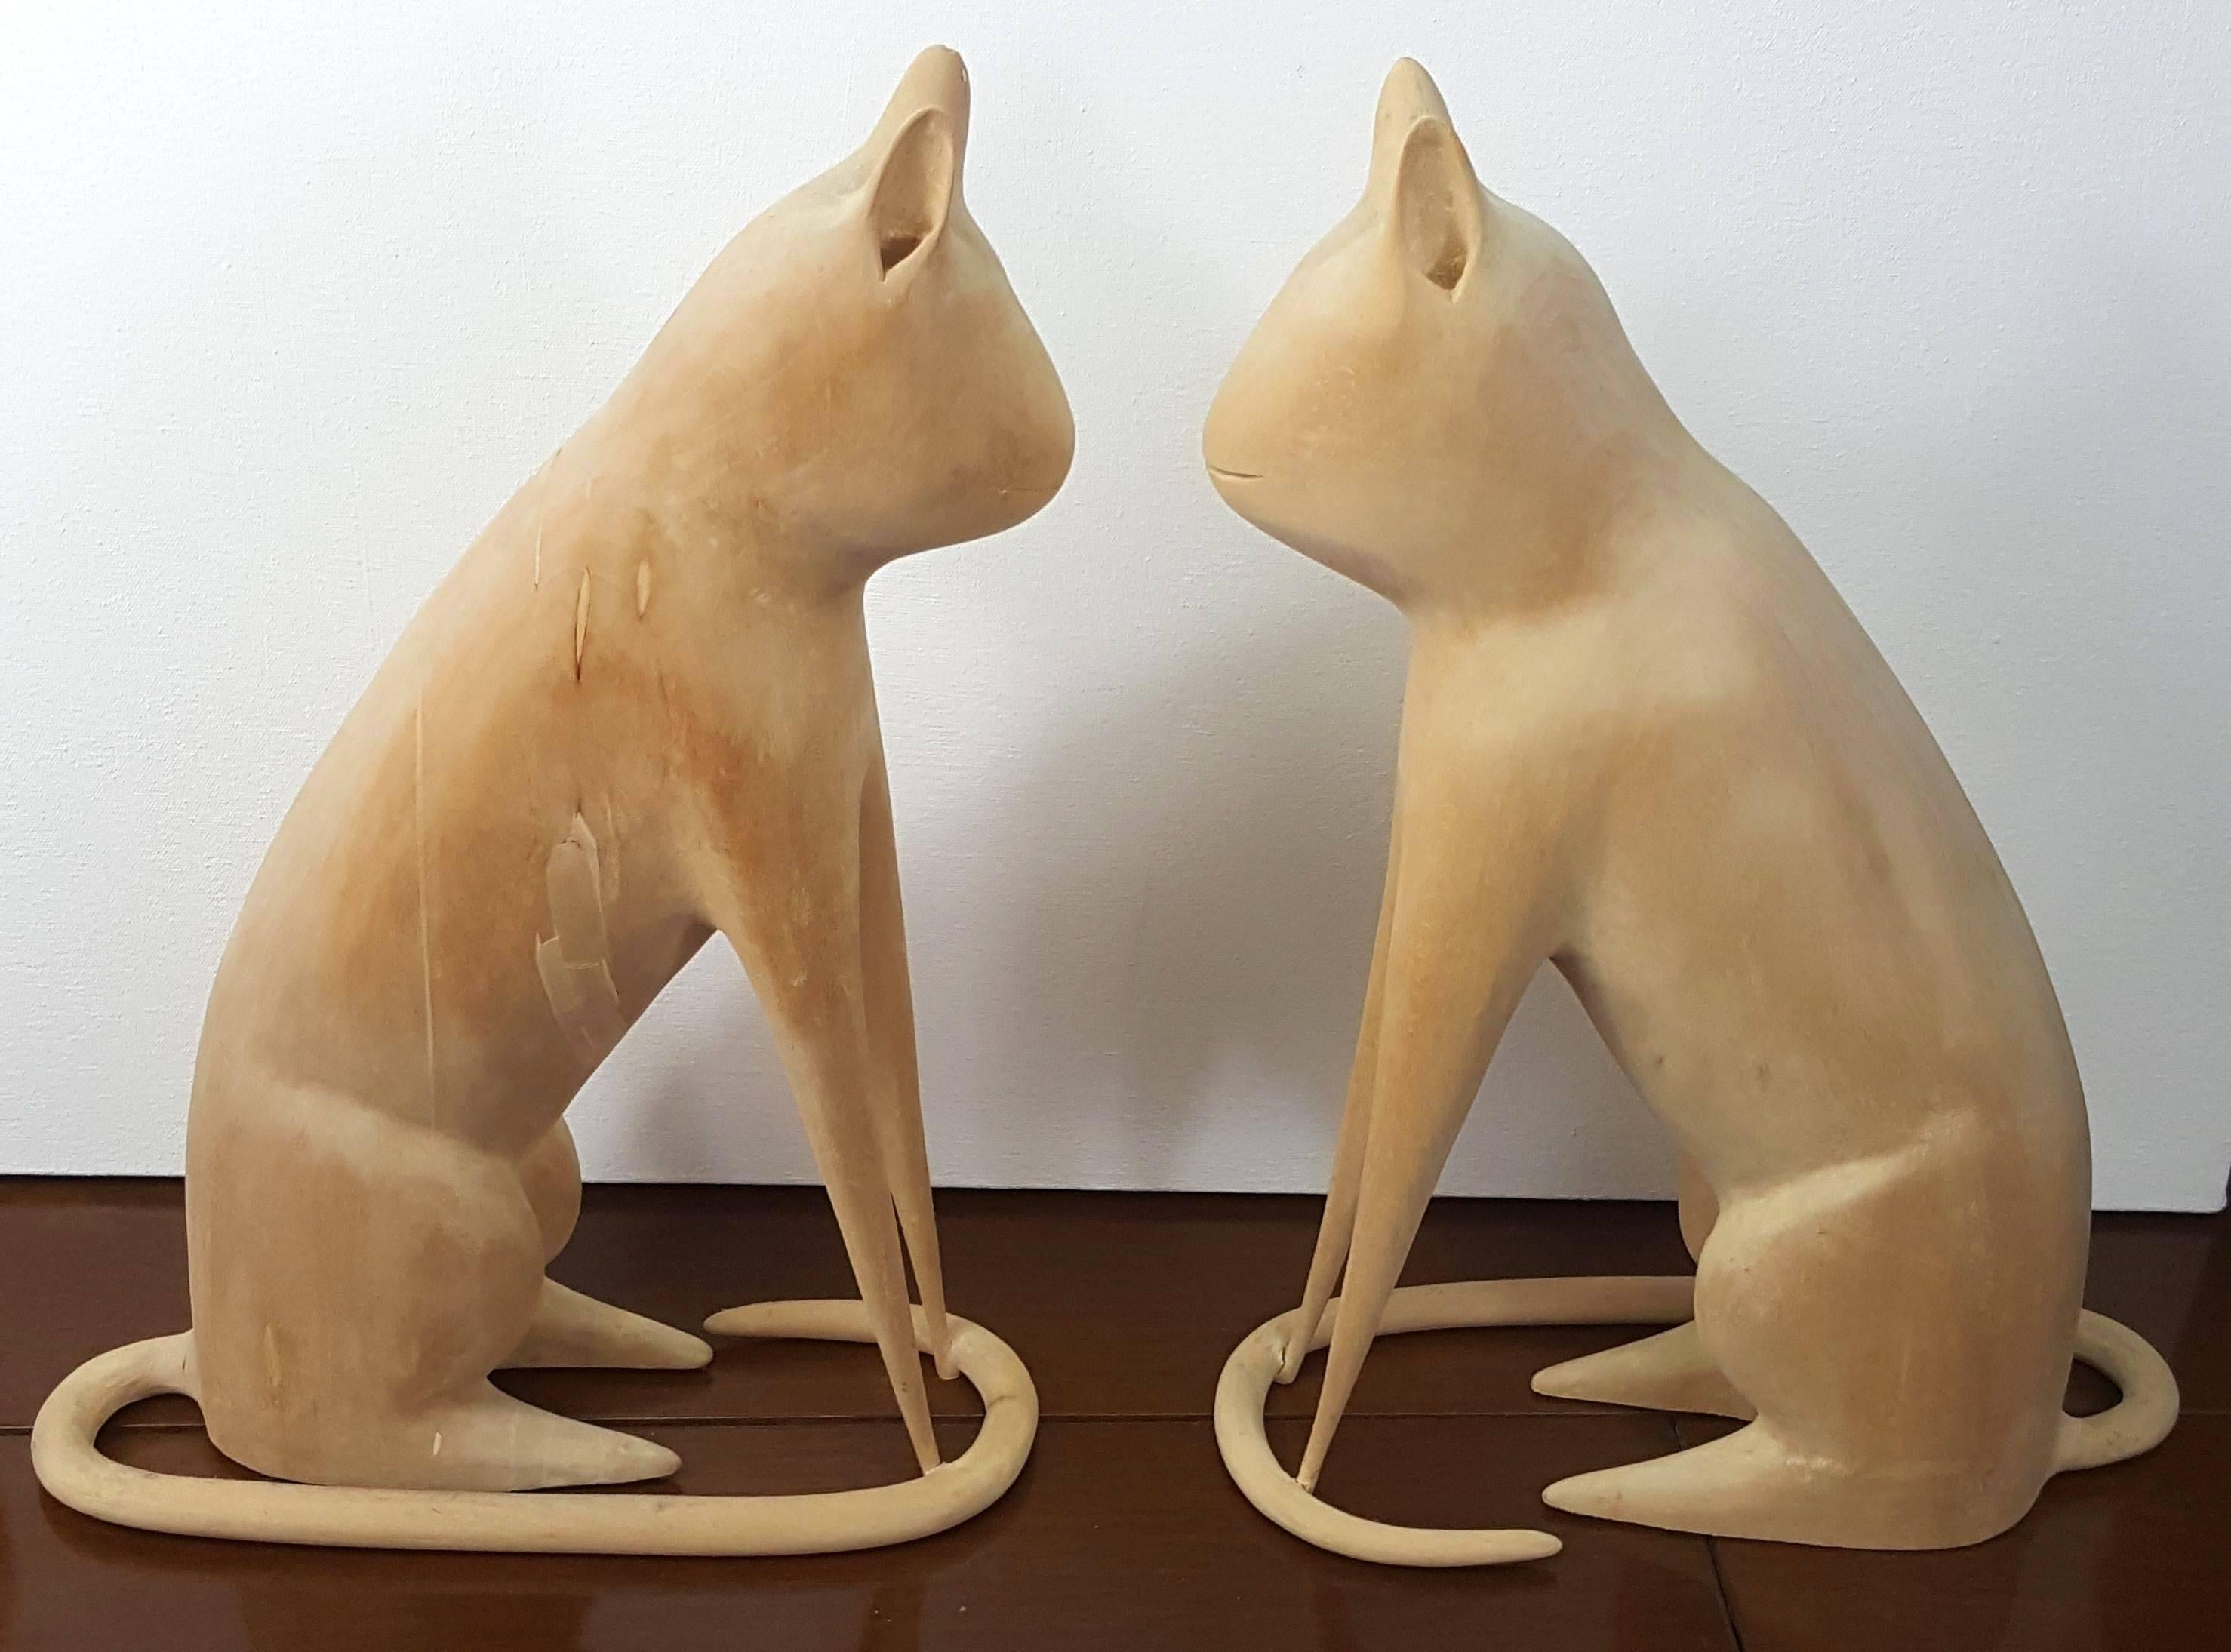 Linvel Barker was a retired metalworker turned folk artist. He didn't start carving until 1984 and he would rough out the shapes on a band saw and his wife would help him finish these. These particular cats were done in 1996 and a very similar cat